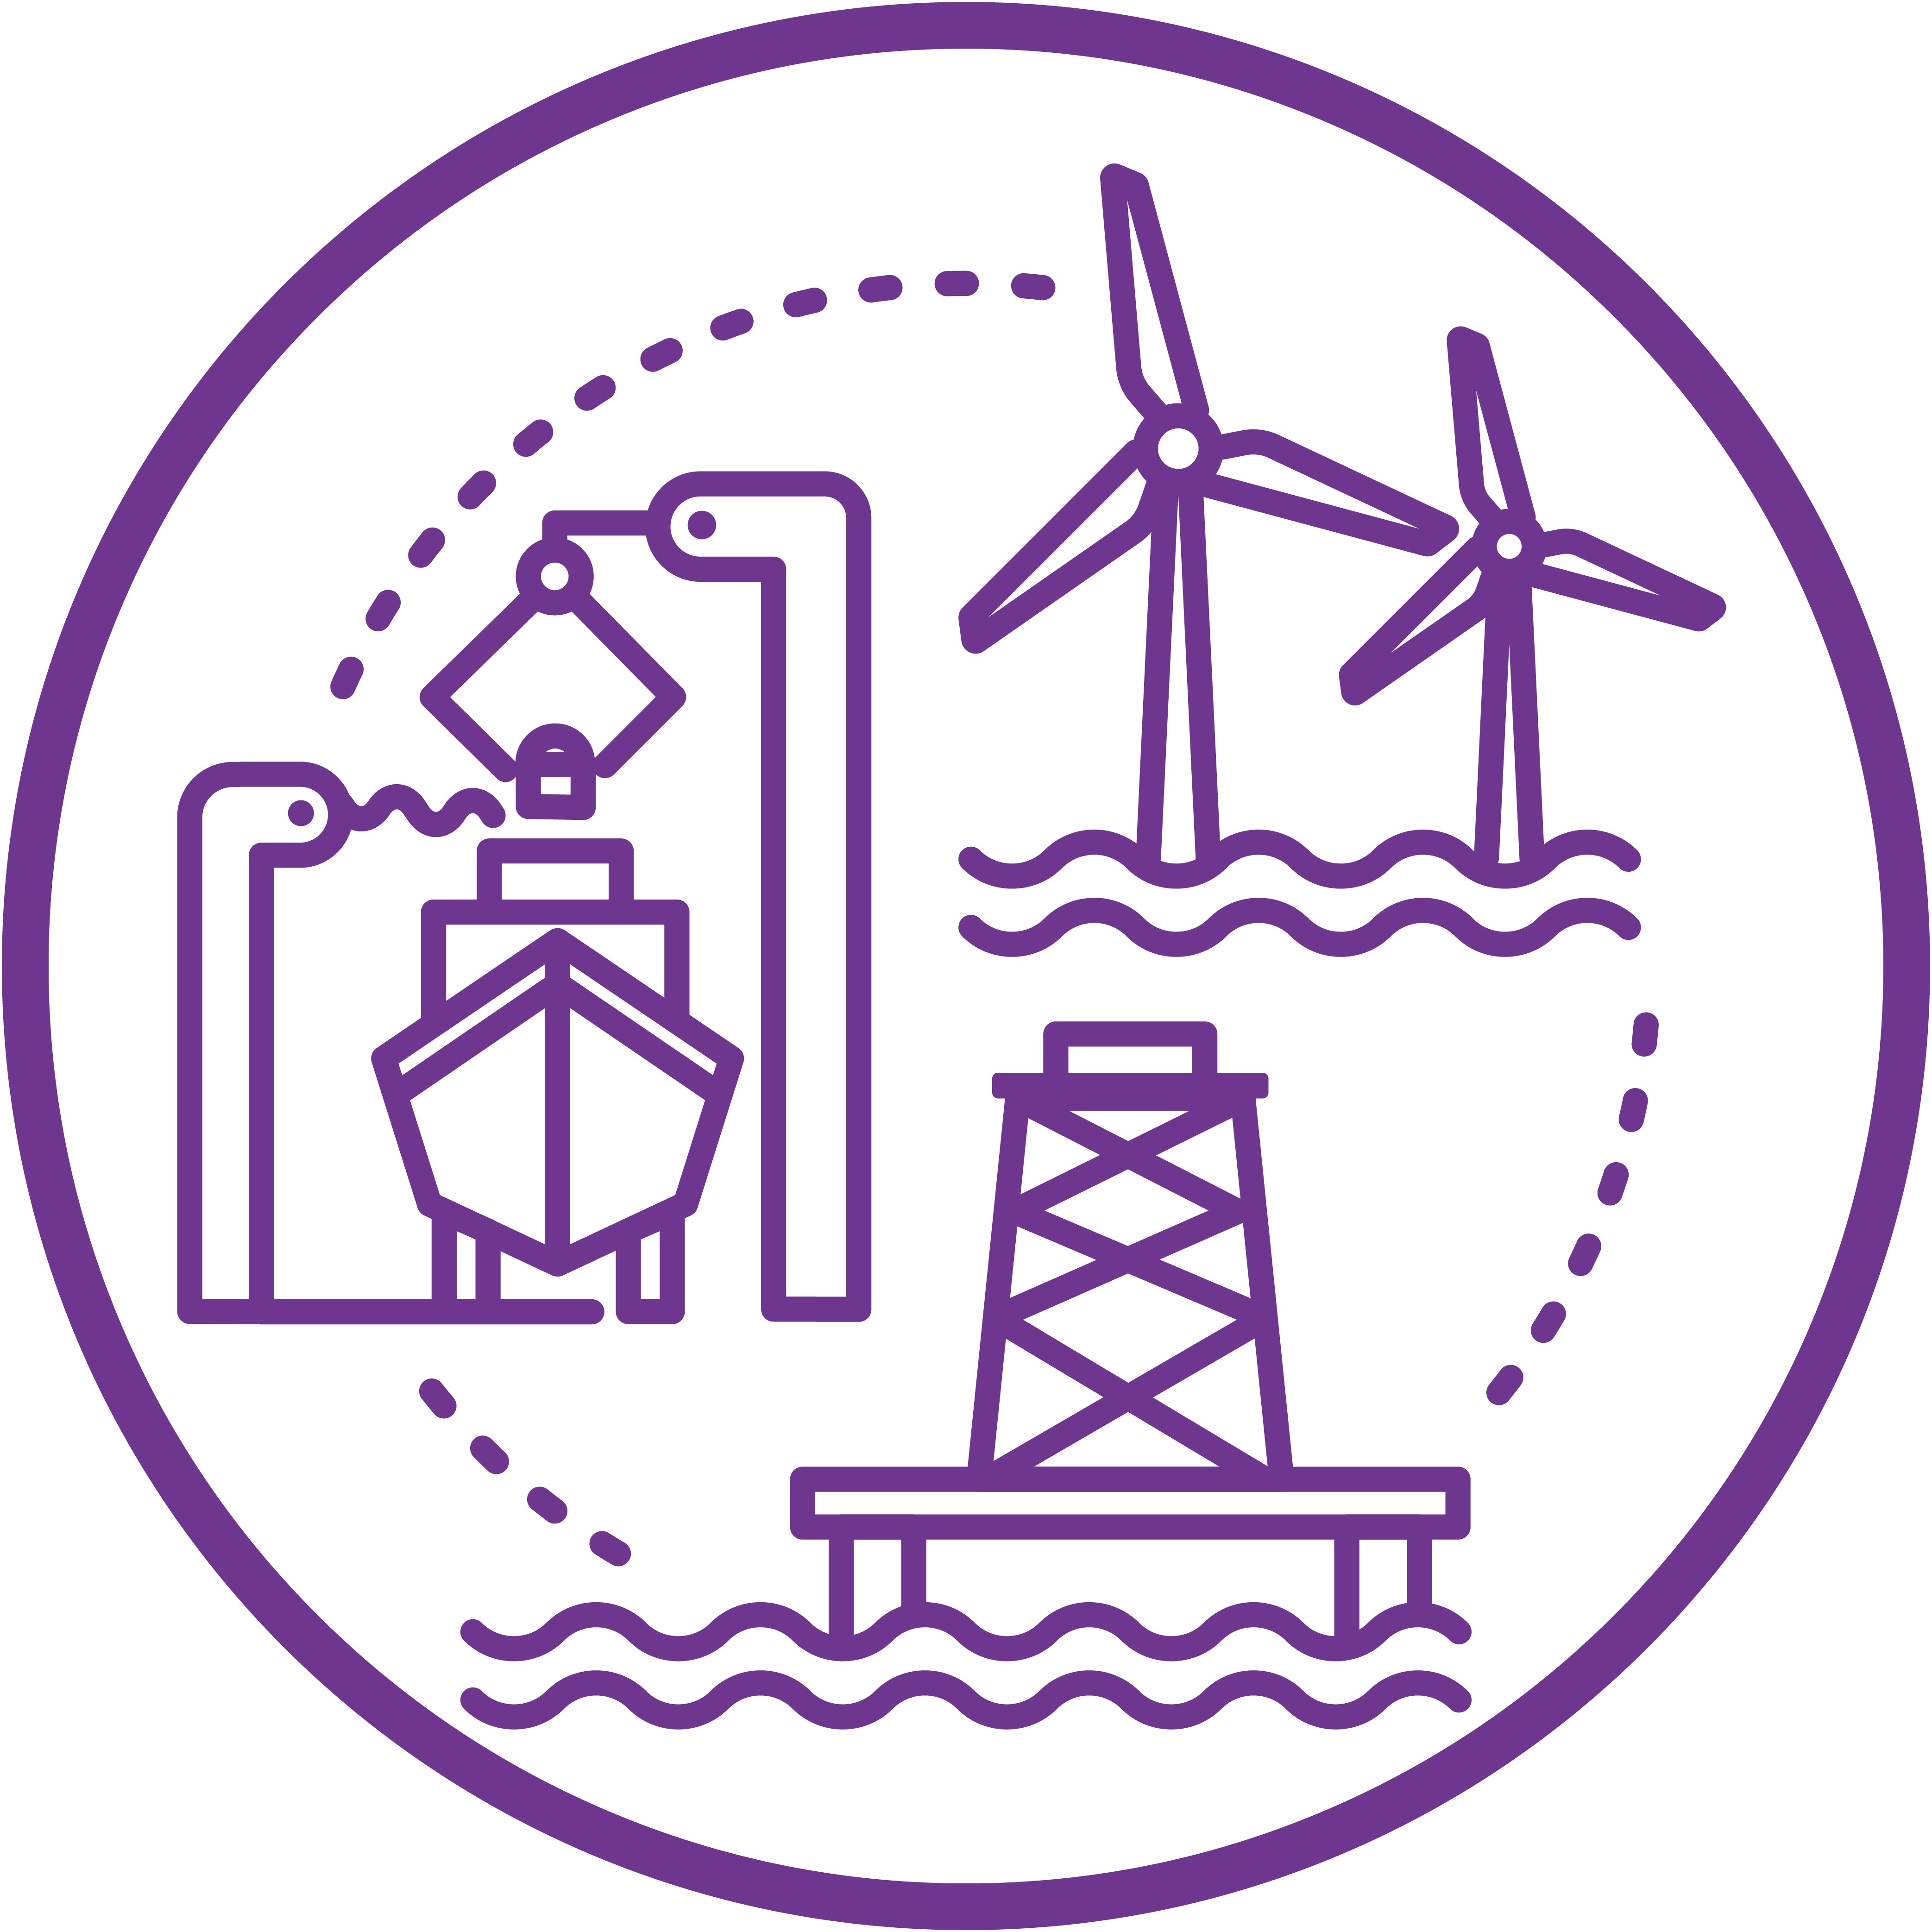 Sector-specific Industry Digital Plans: The marine and offshore engineering sector icon with a stylized image of a ship and an oil rig